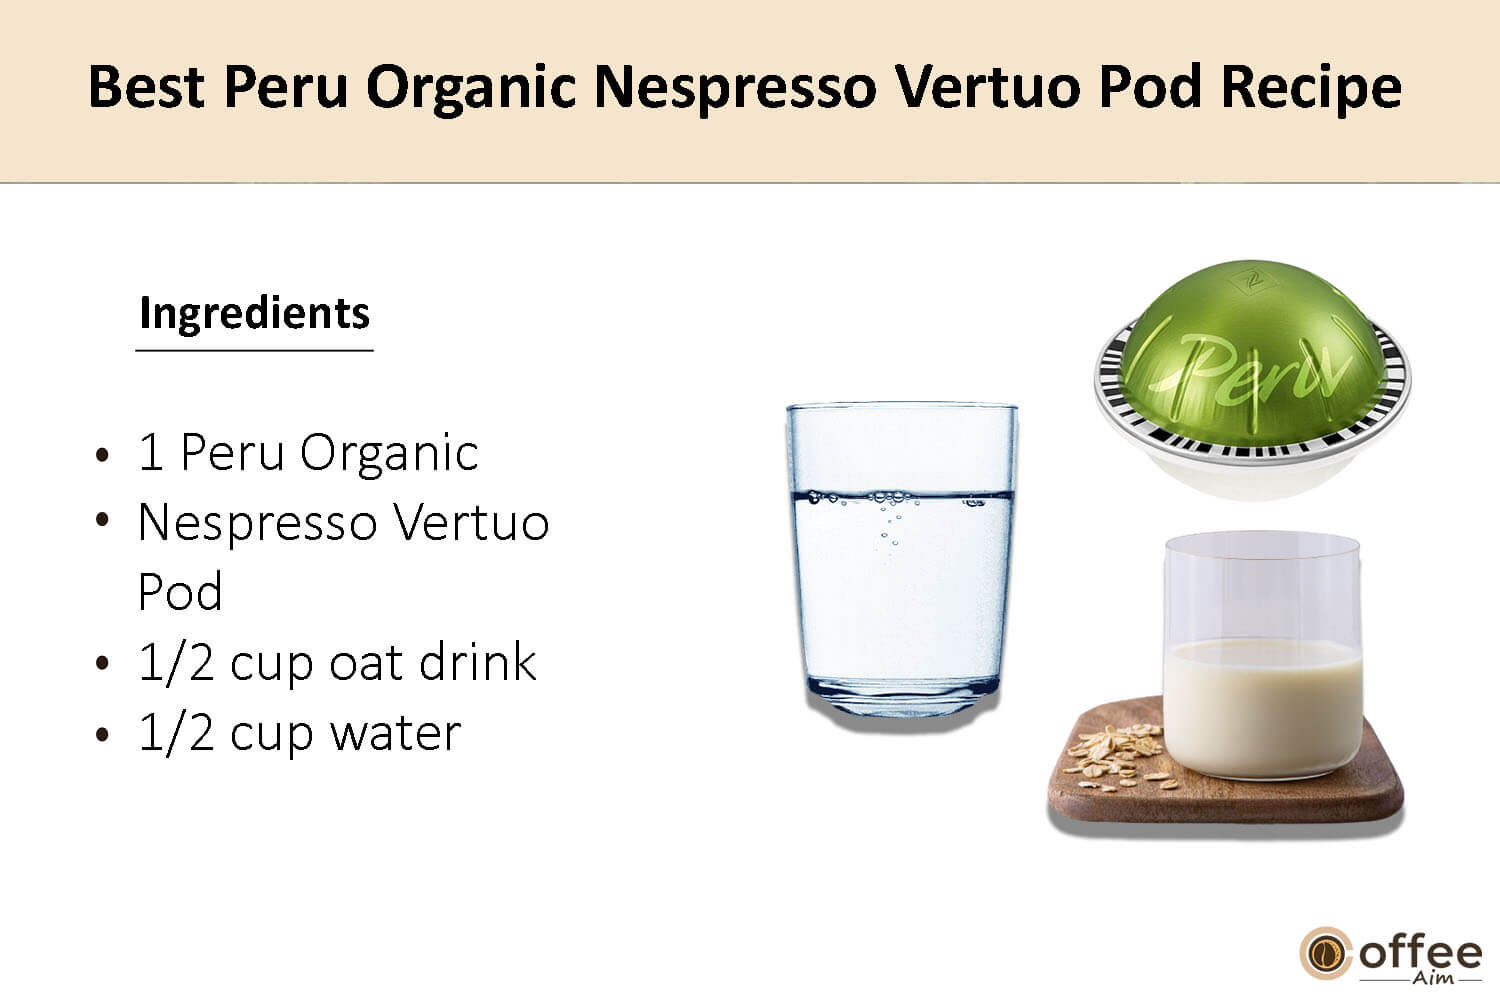 In this image, I elucidate the components that comprise the finest Peru Organic Nespresso Vertuo coffee pod.